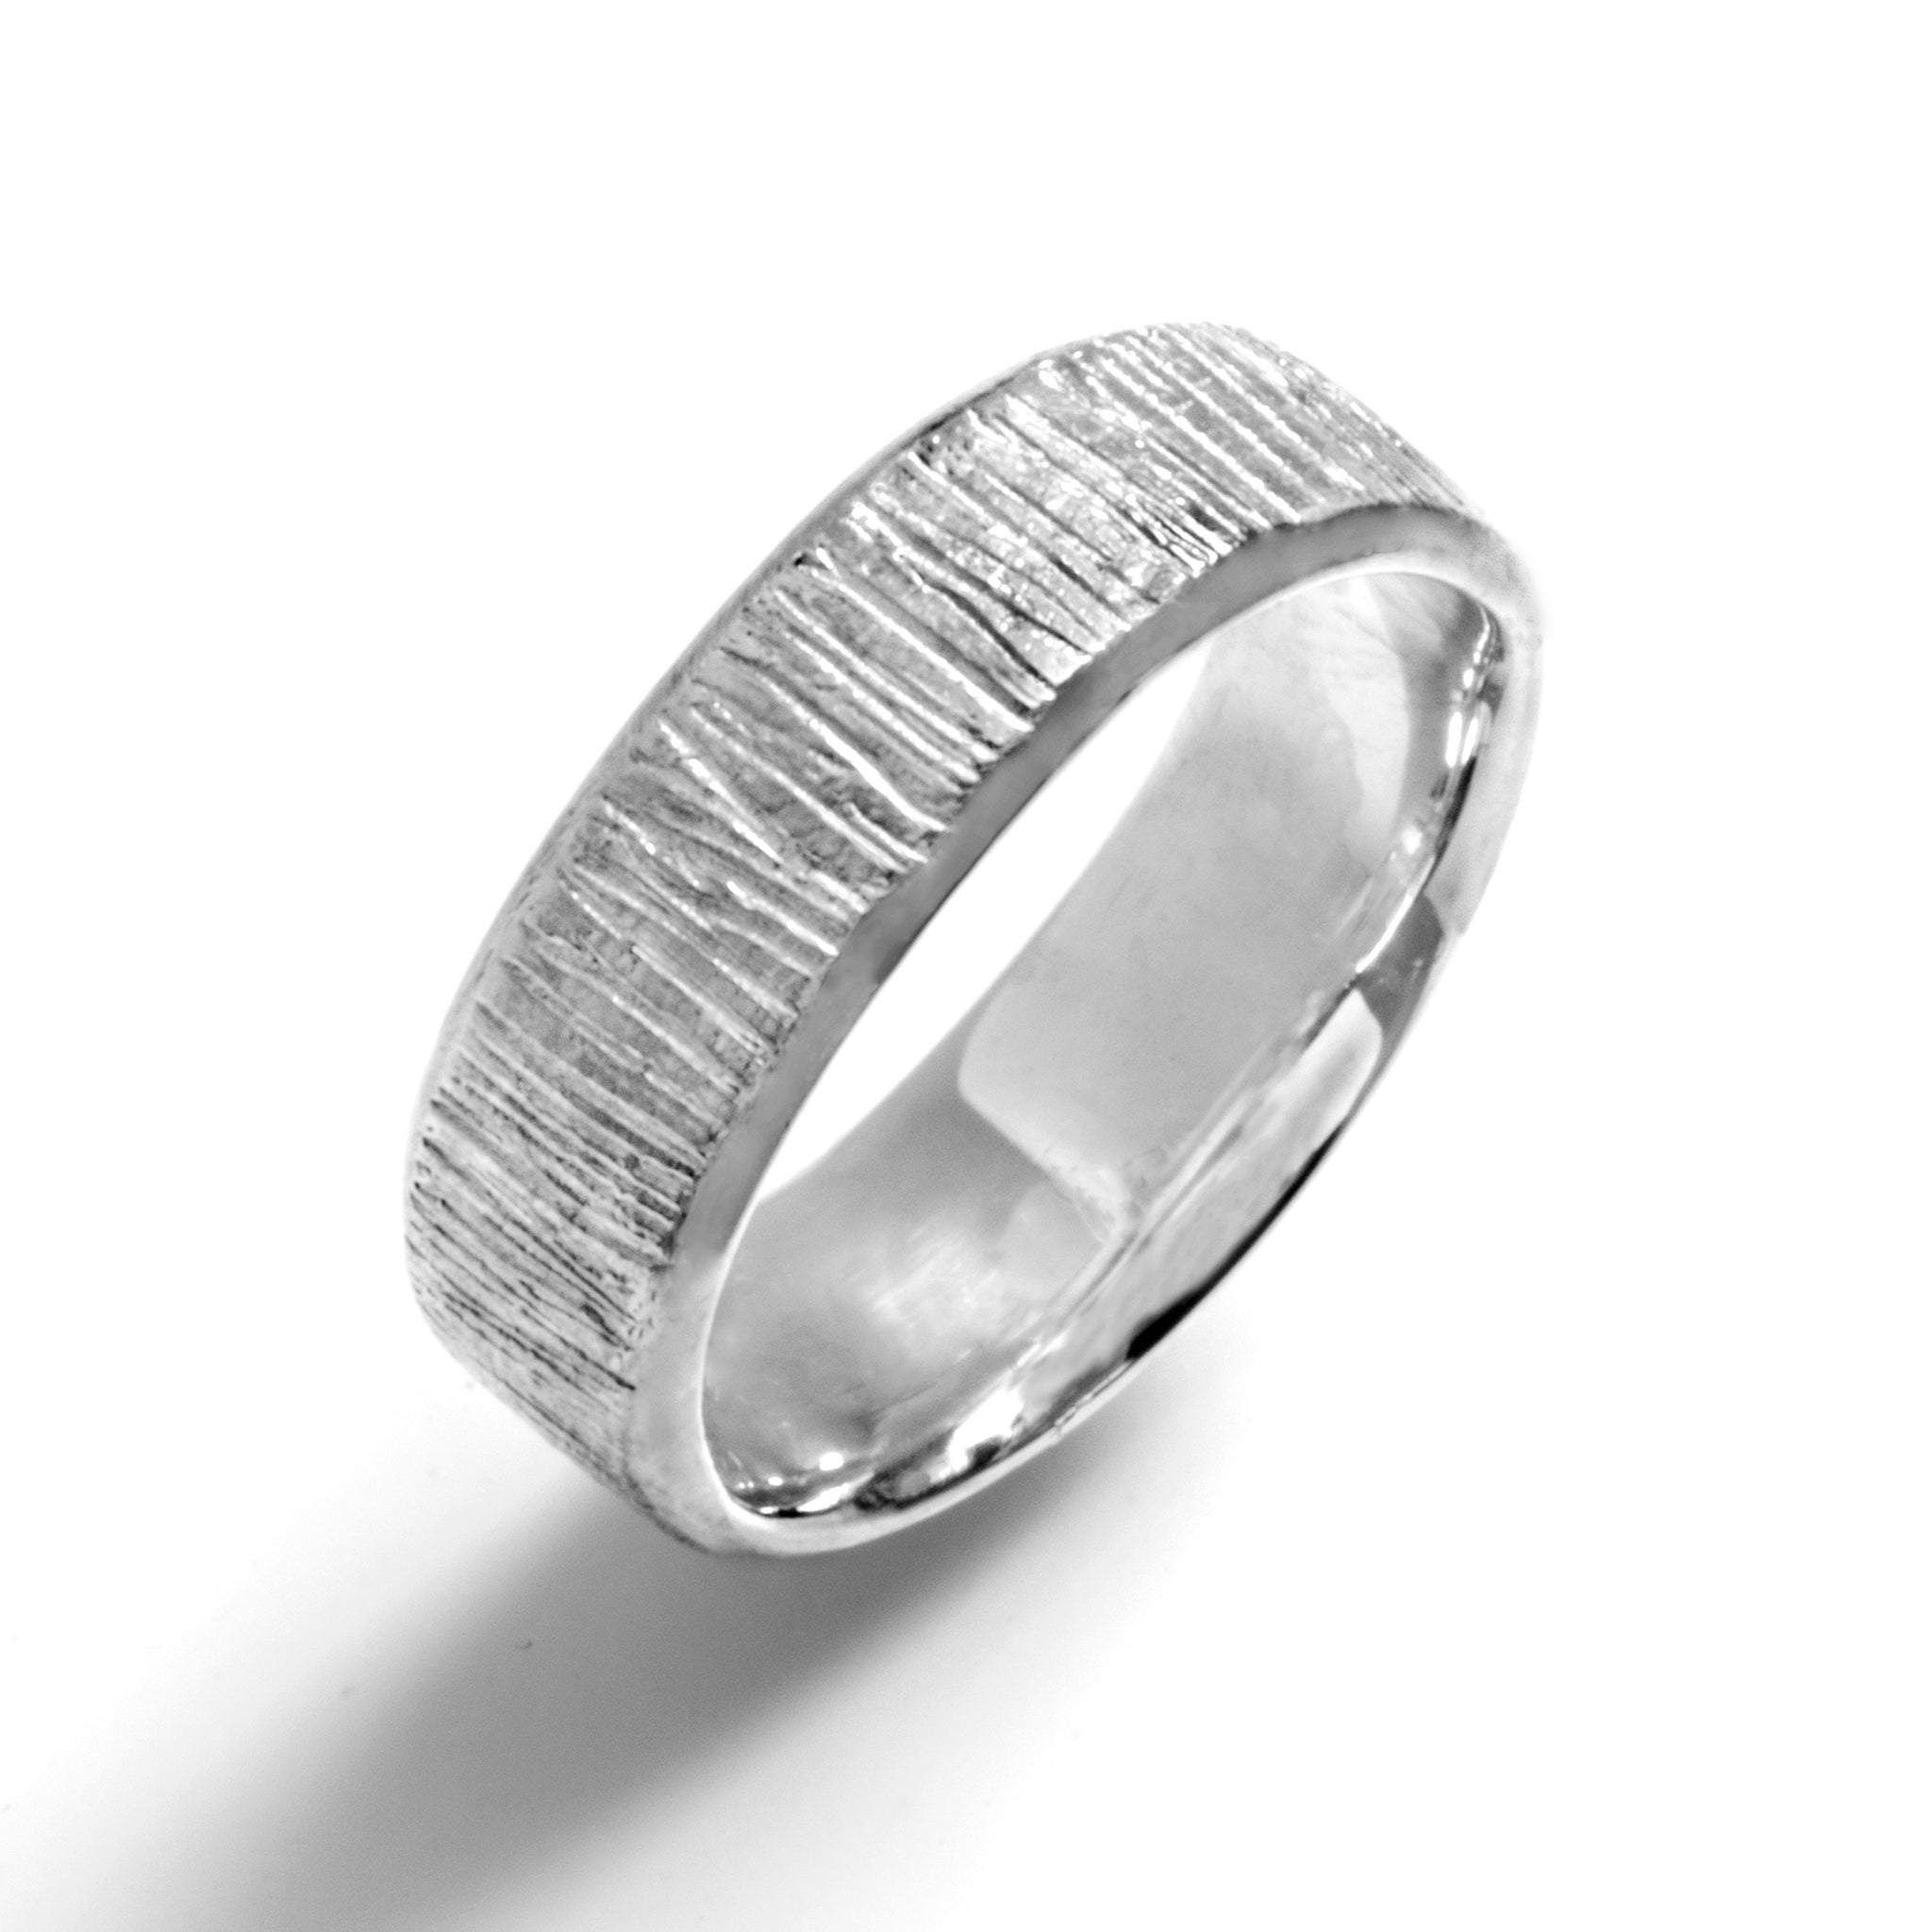 Lined Bevel Ring